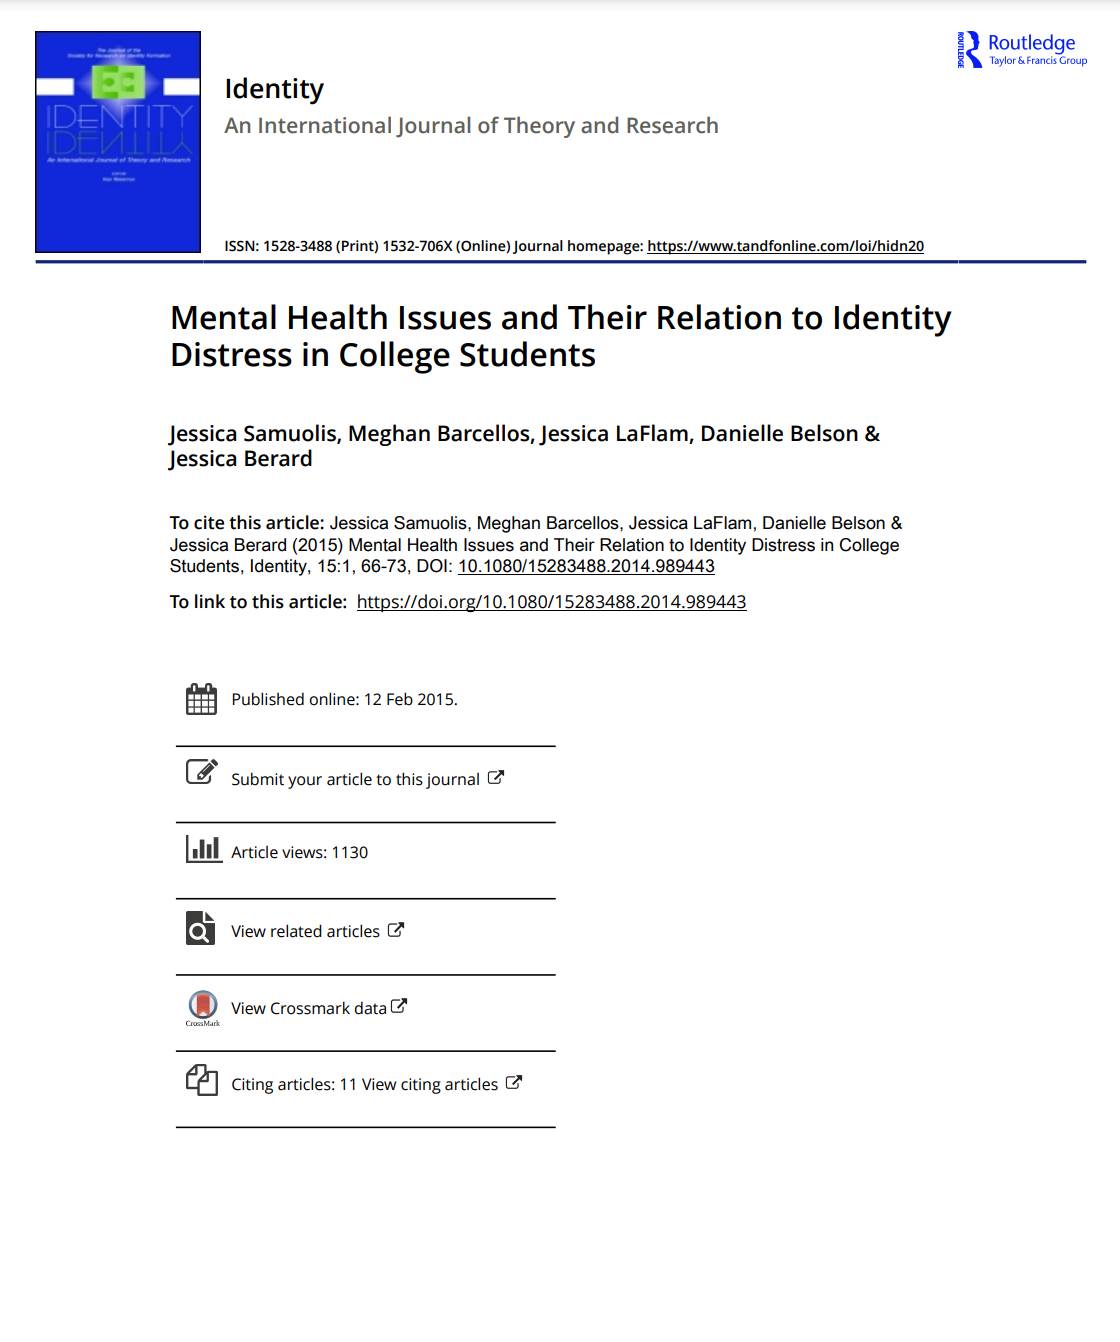 Mental Health Issues and Their Relation to Identity Distress in College Students by Jessica Samuolis, Meghan Barcellos, Jessica LaFlam, Danielle Belson & Jessica Berard